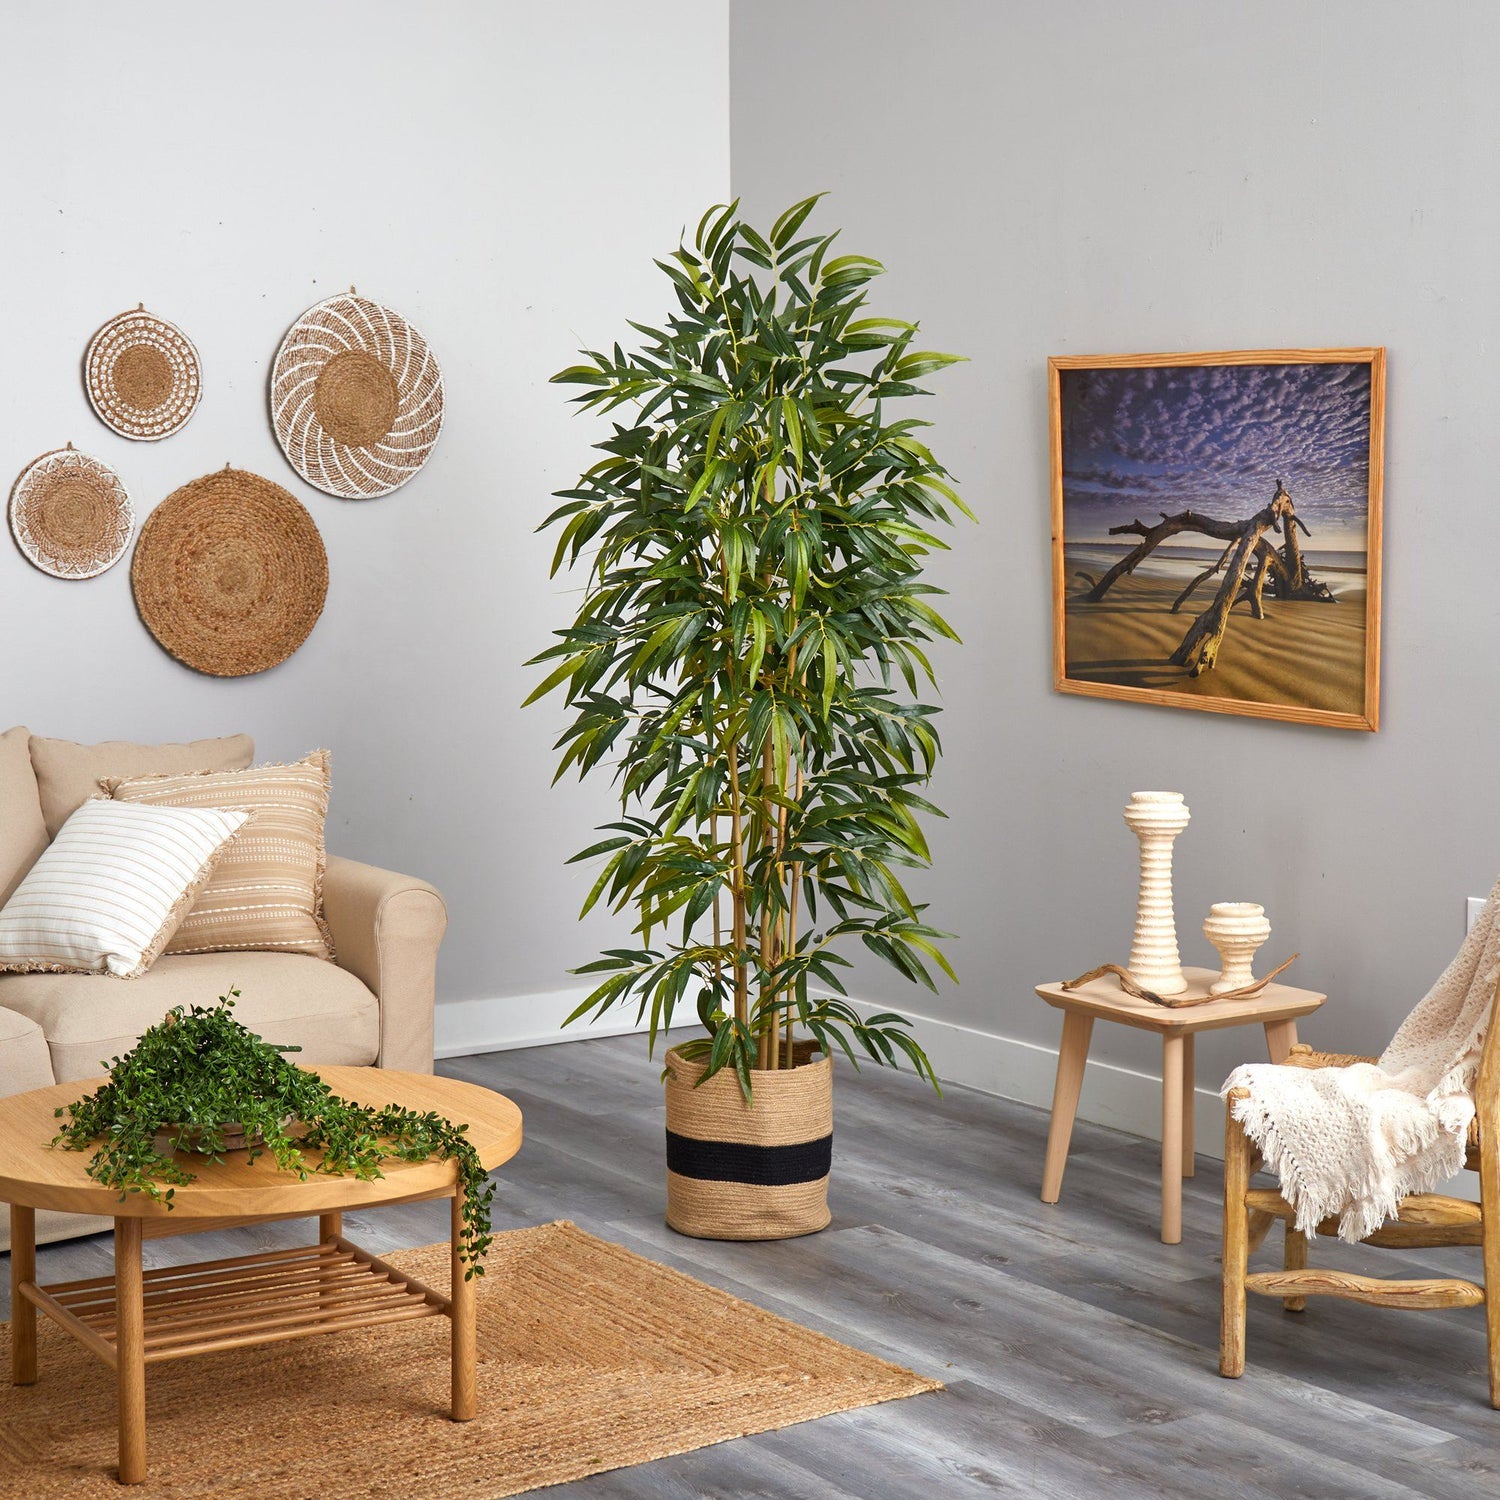 6' Bamboo Artificial Tree with 1024 Bendable Branches in Handmade Natural Cotton Planter